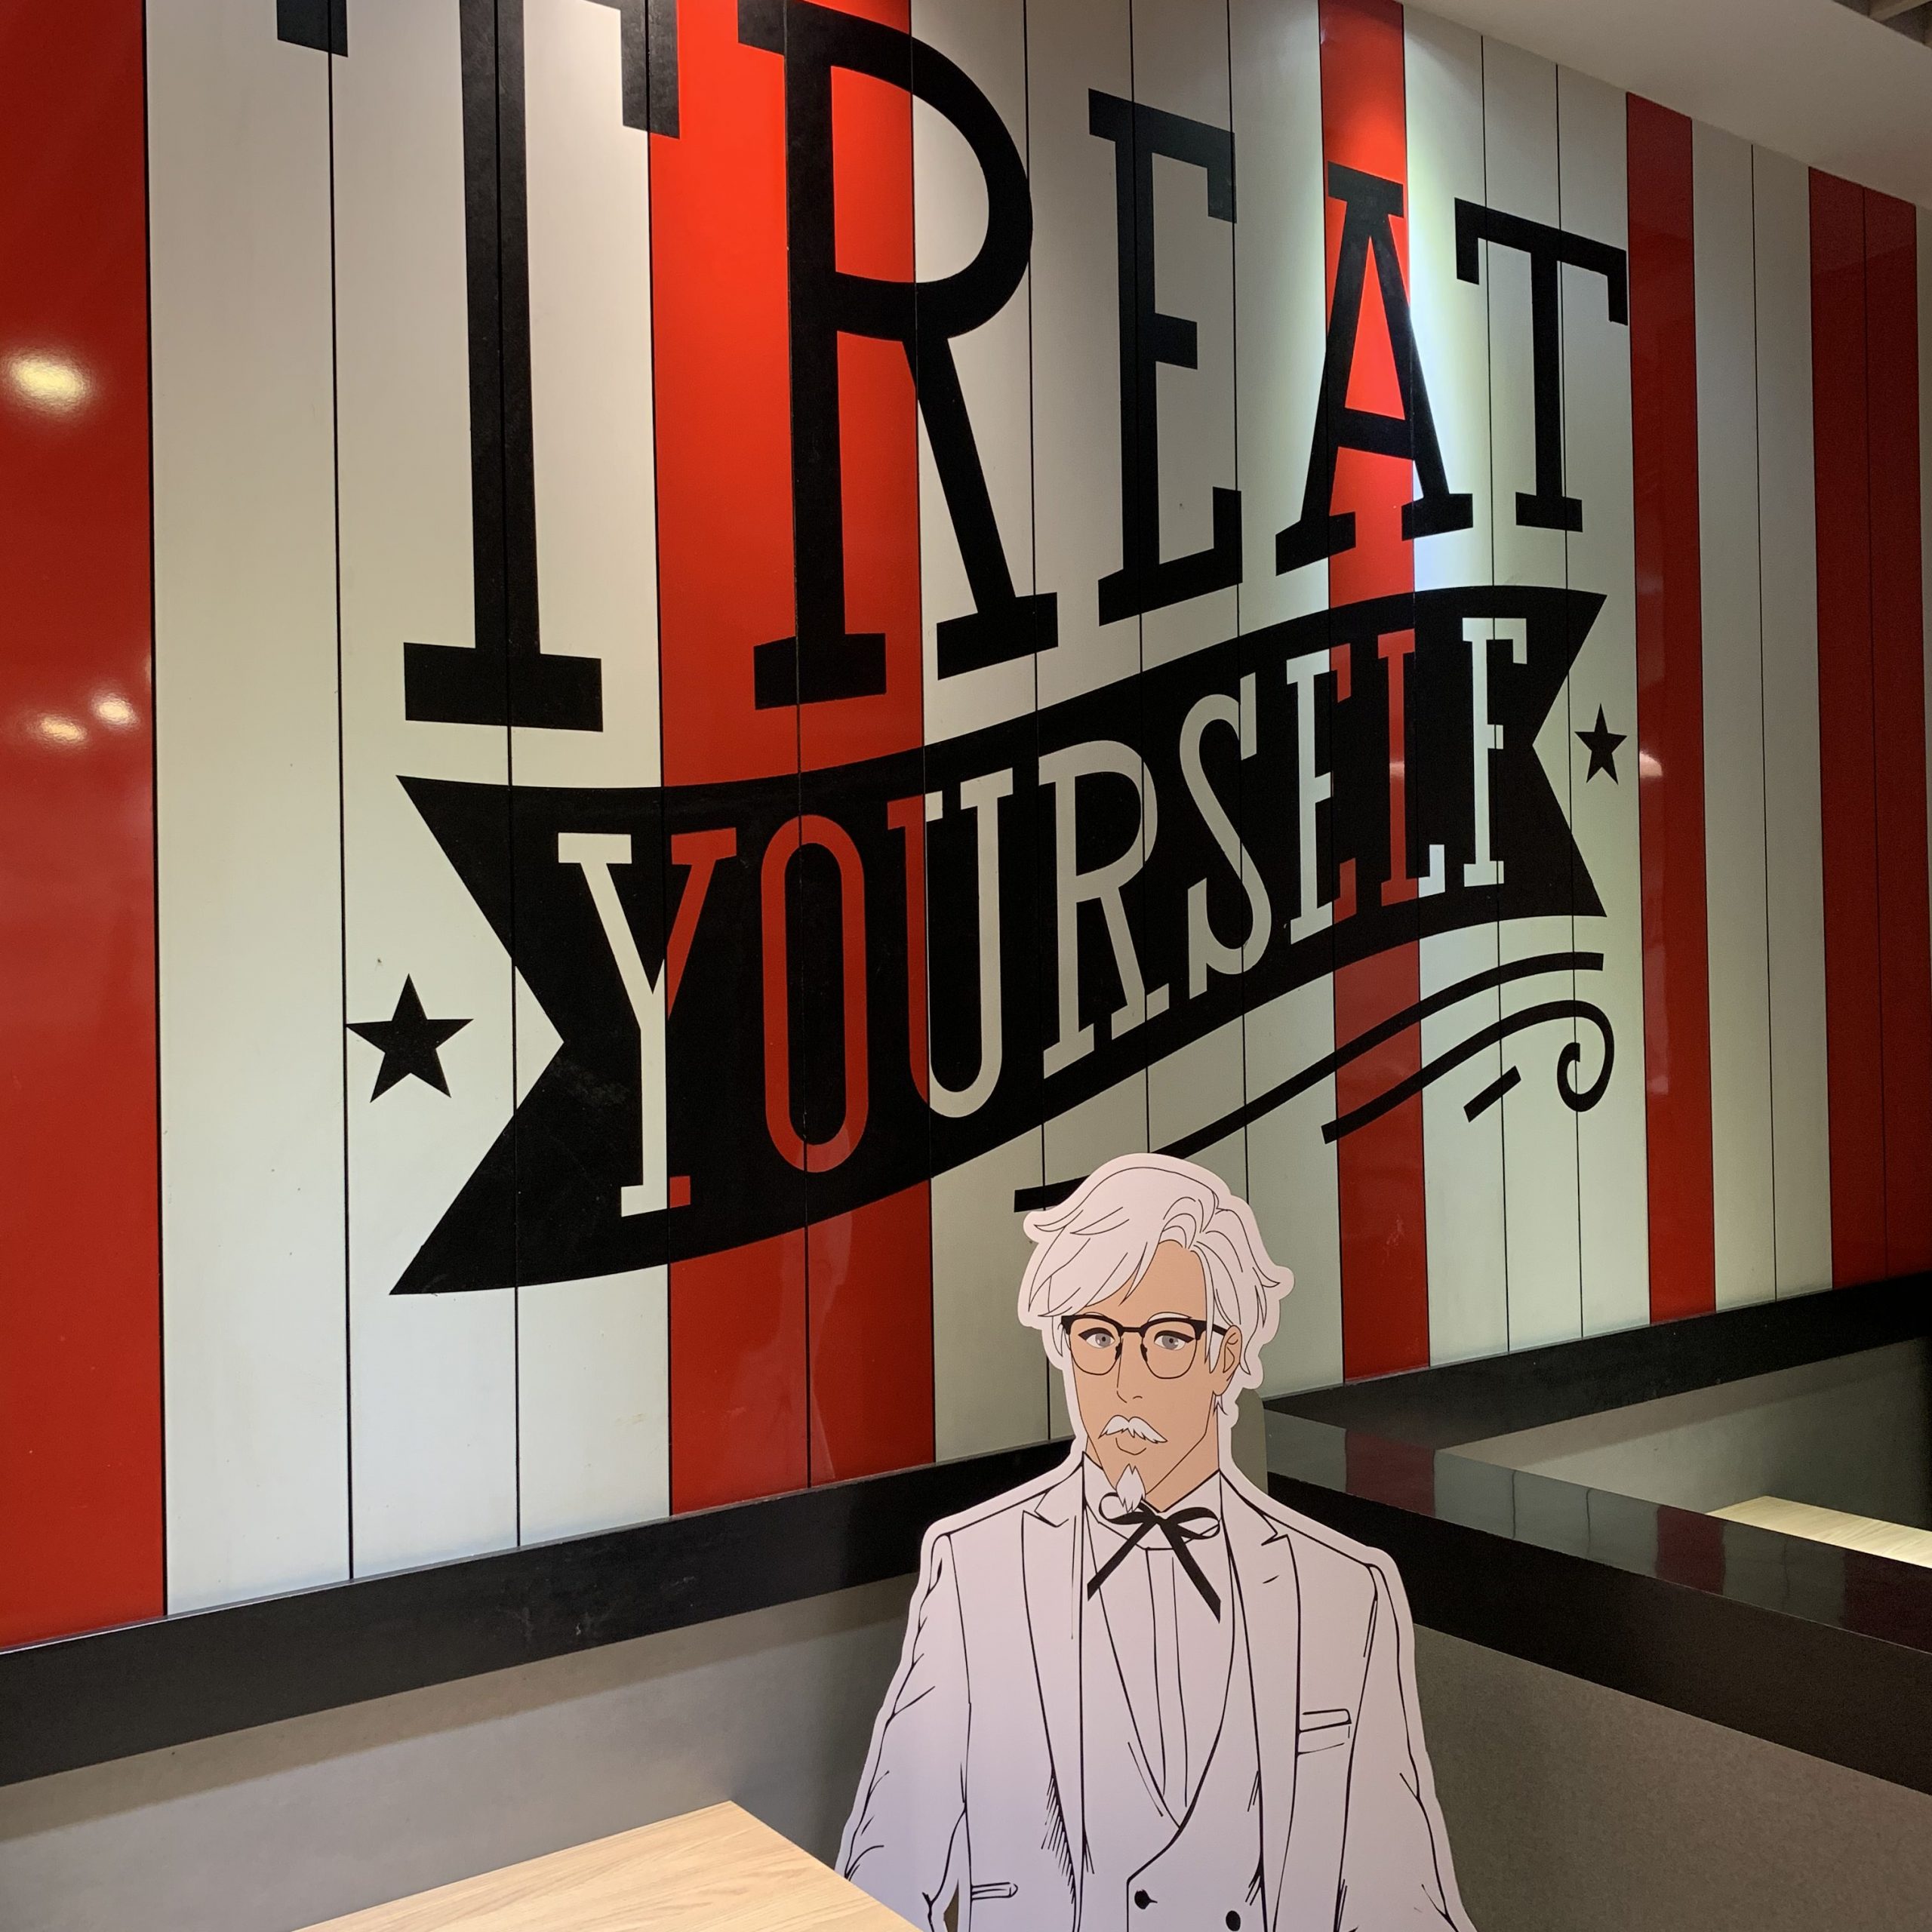 Dating game featuring anime Colonel Sanders not so fresh  Boing Boing